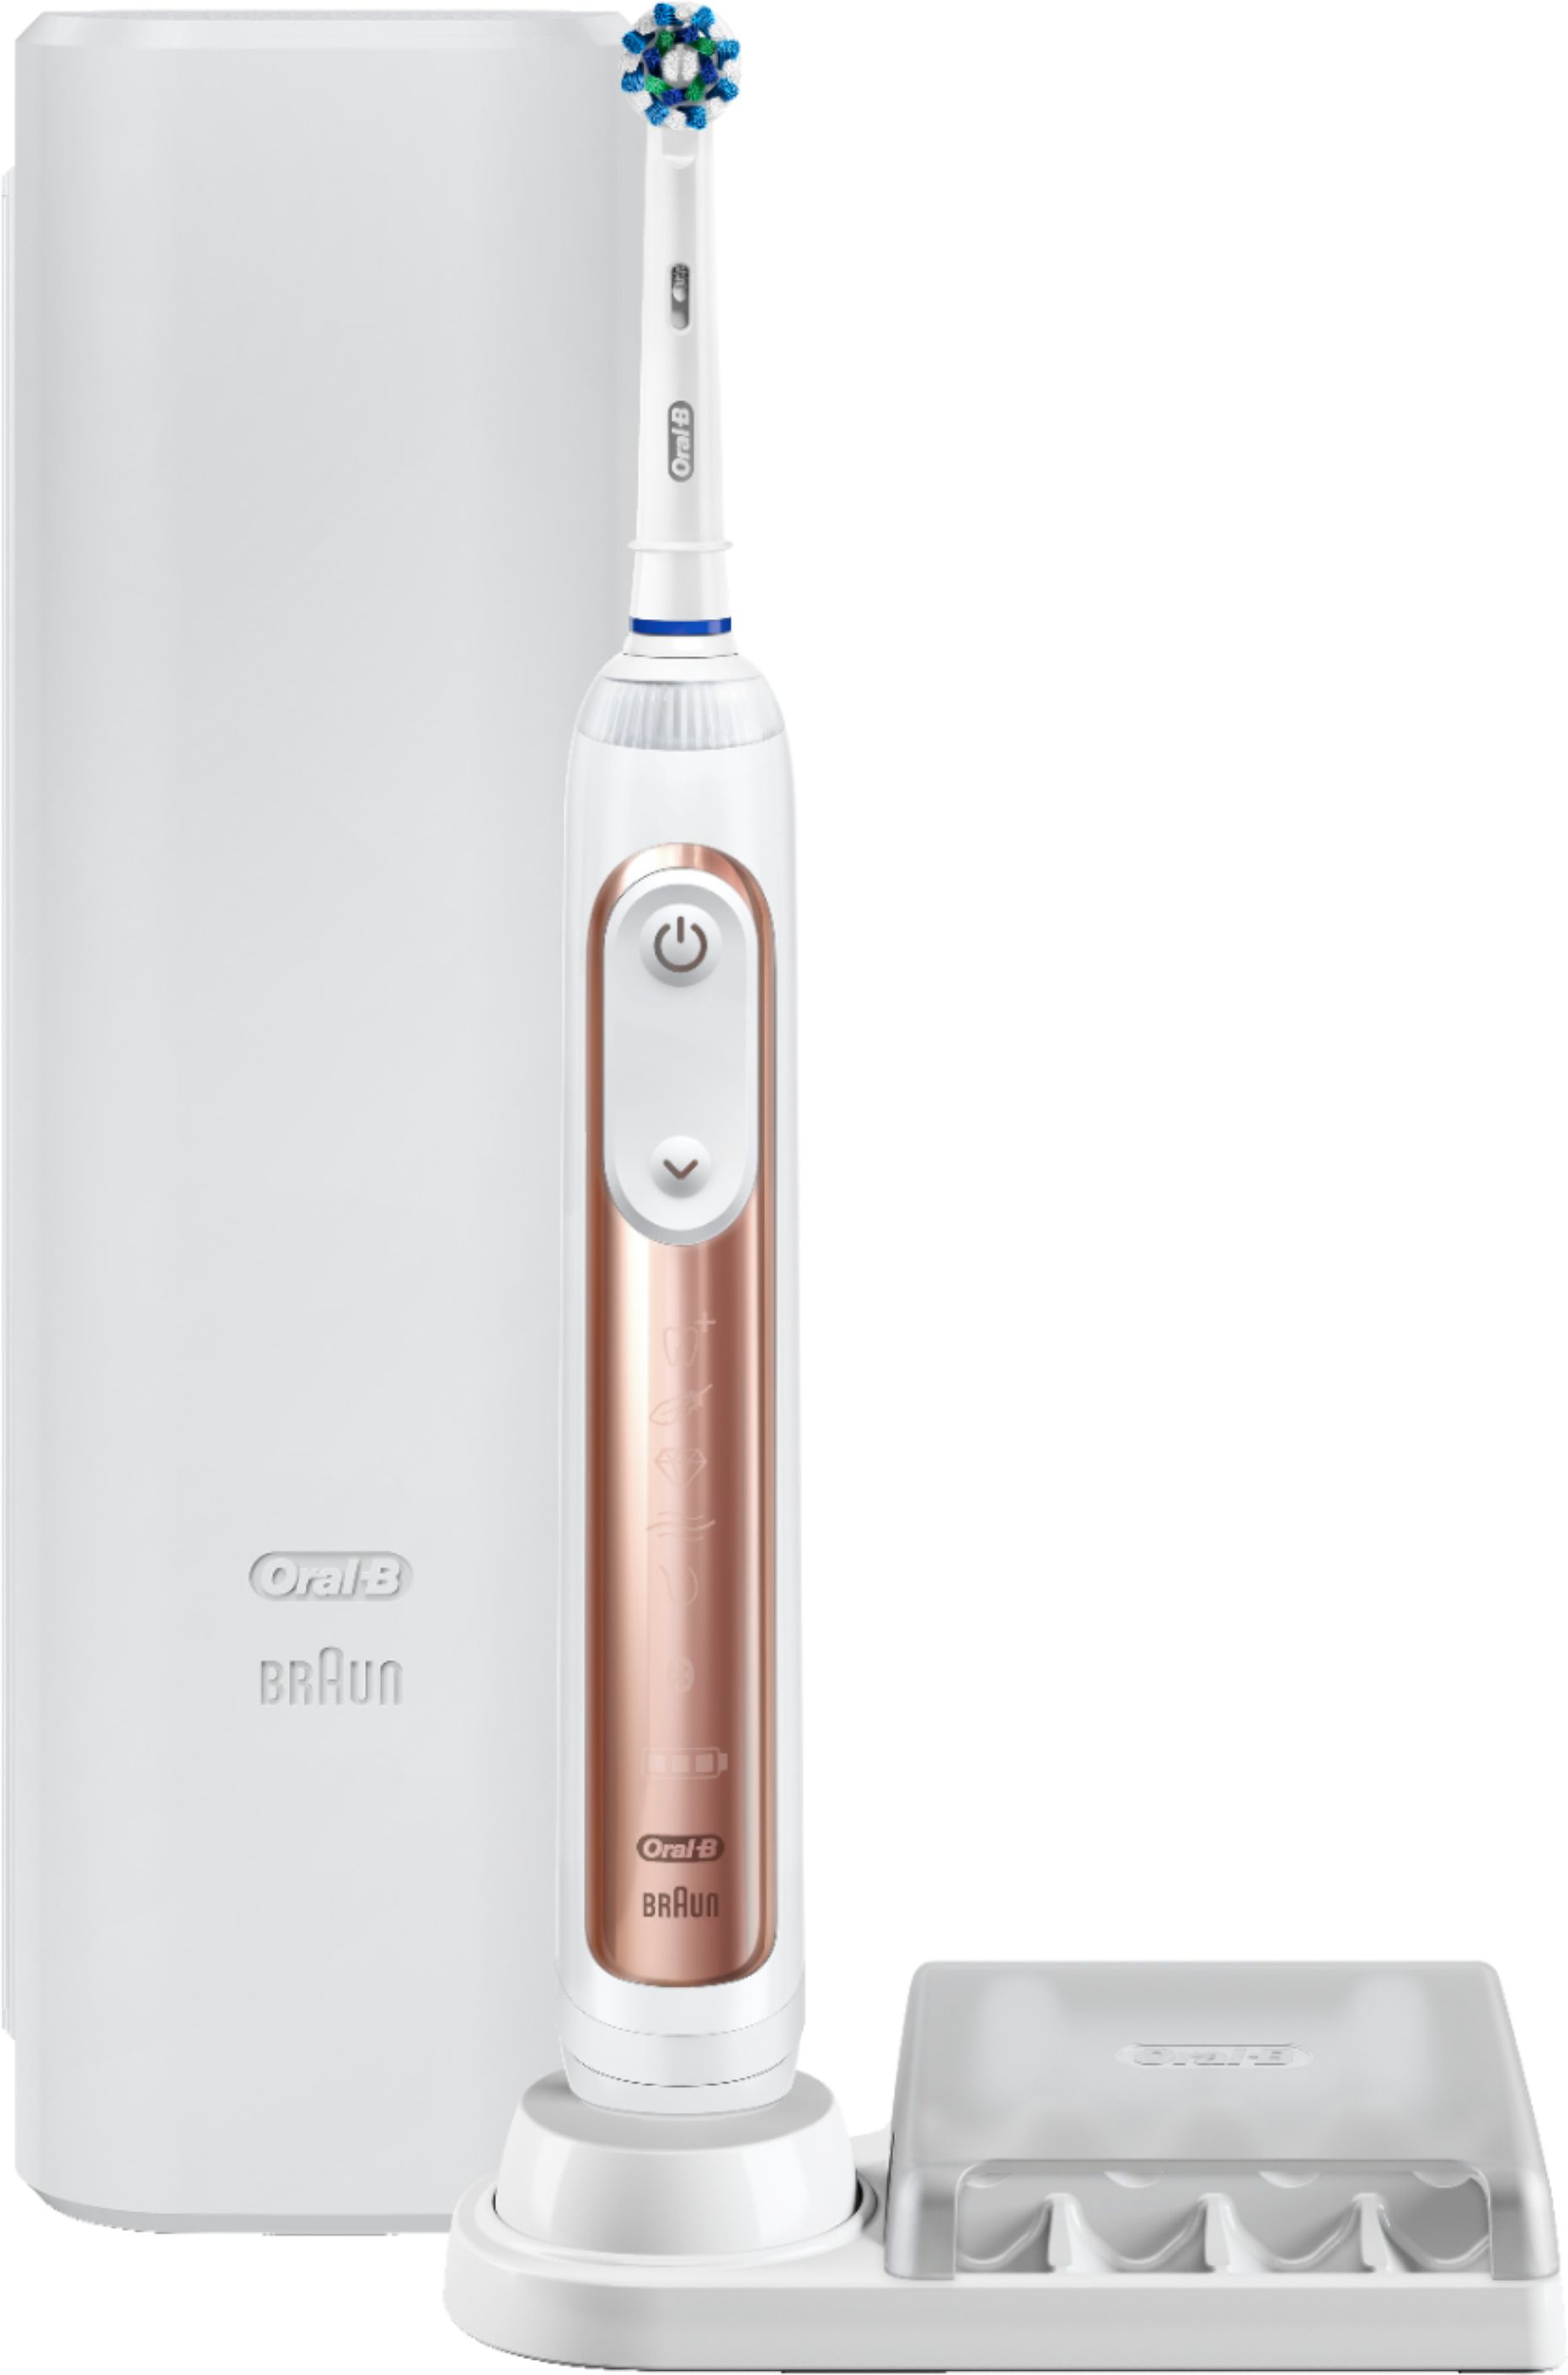 Questions and Answers: Oral-B SmartSeries Pro 6000 Connected Electric ...